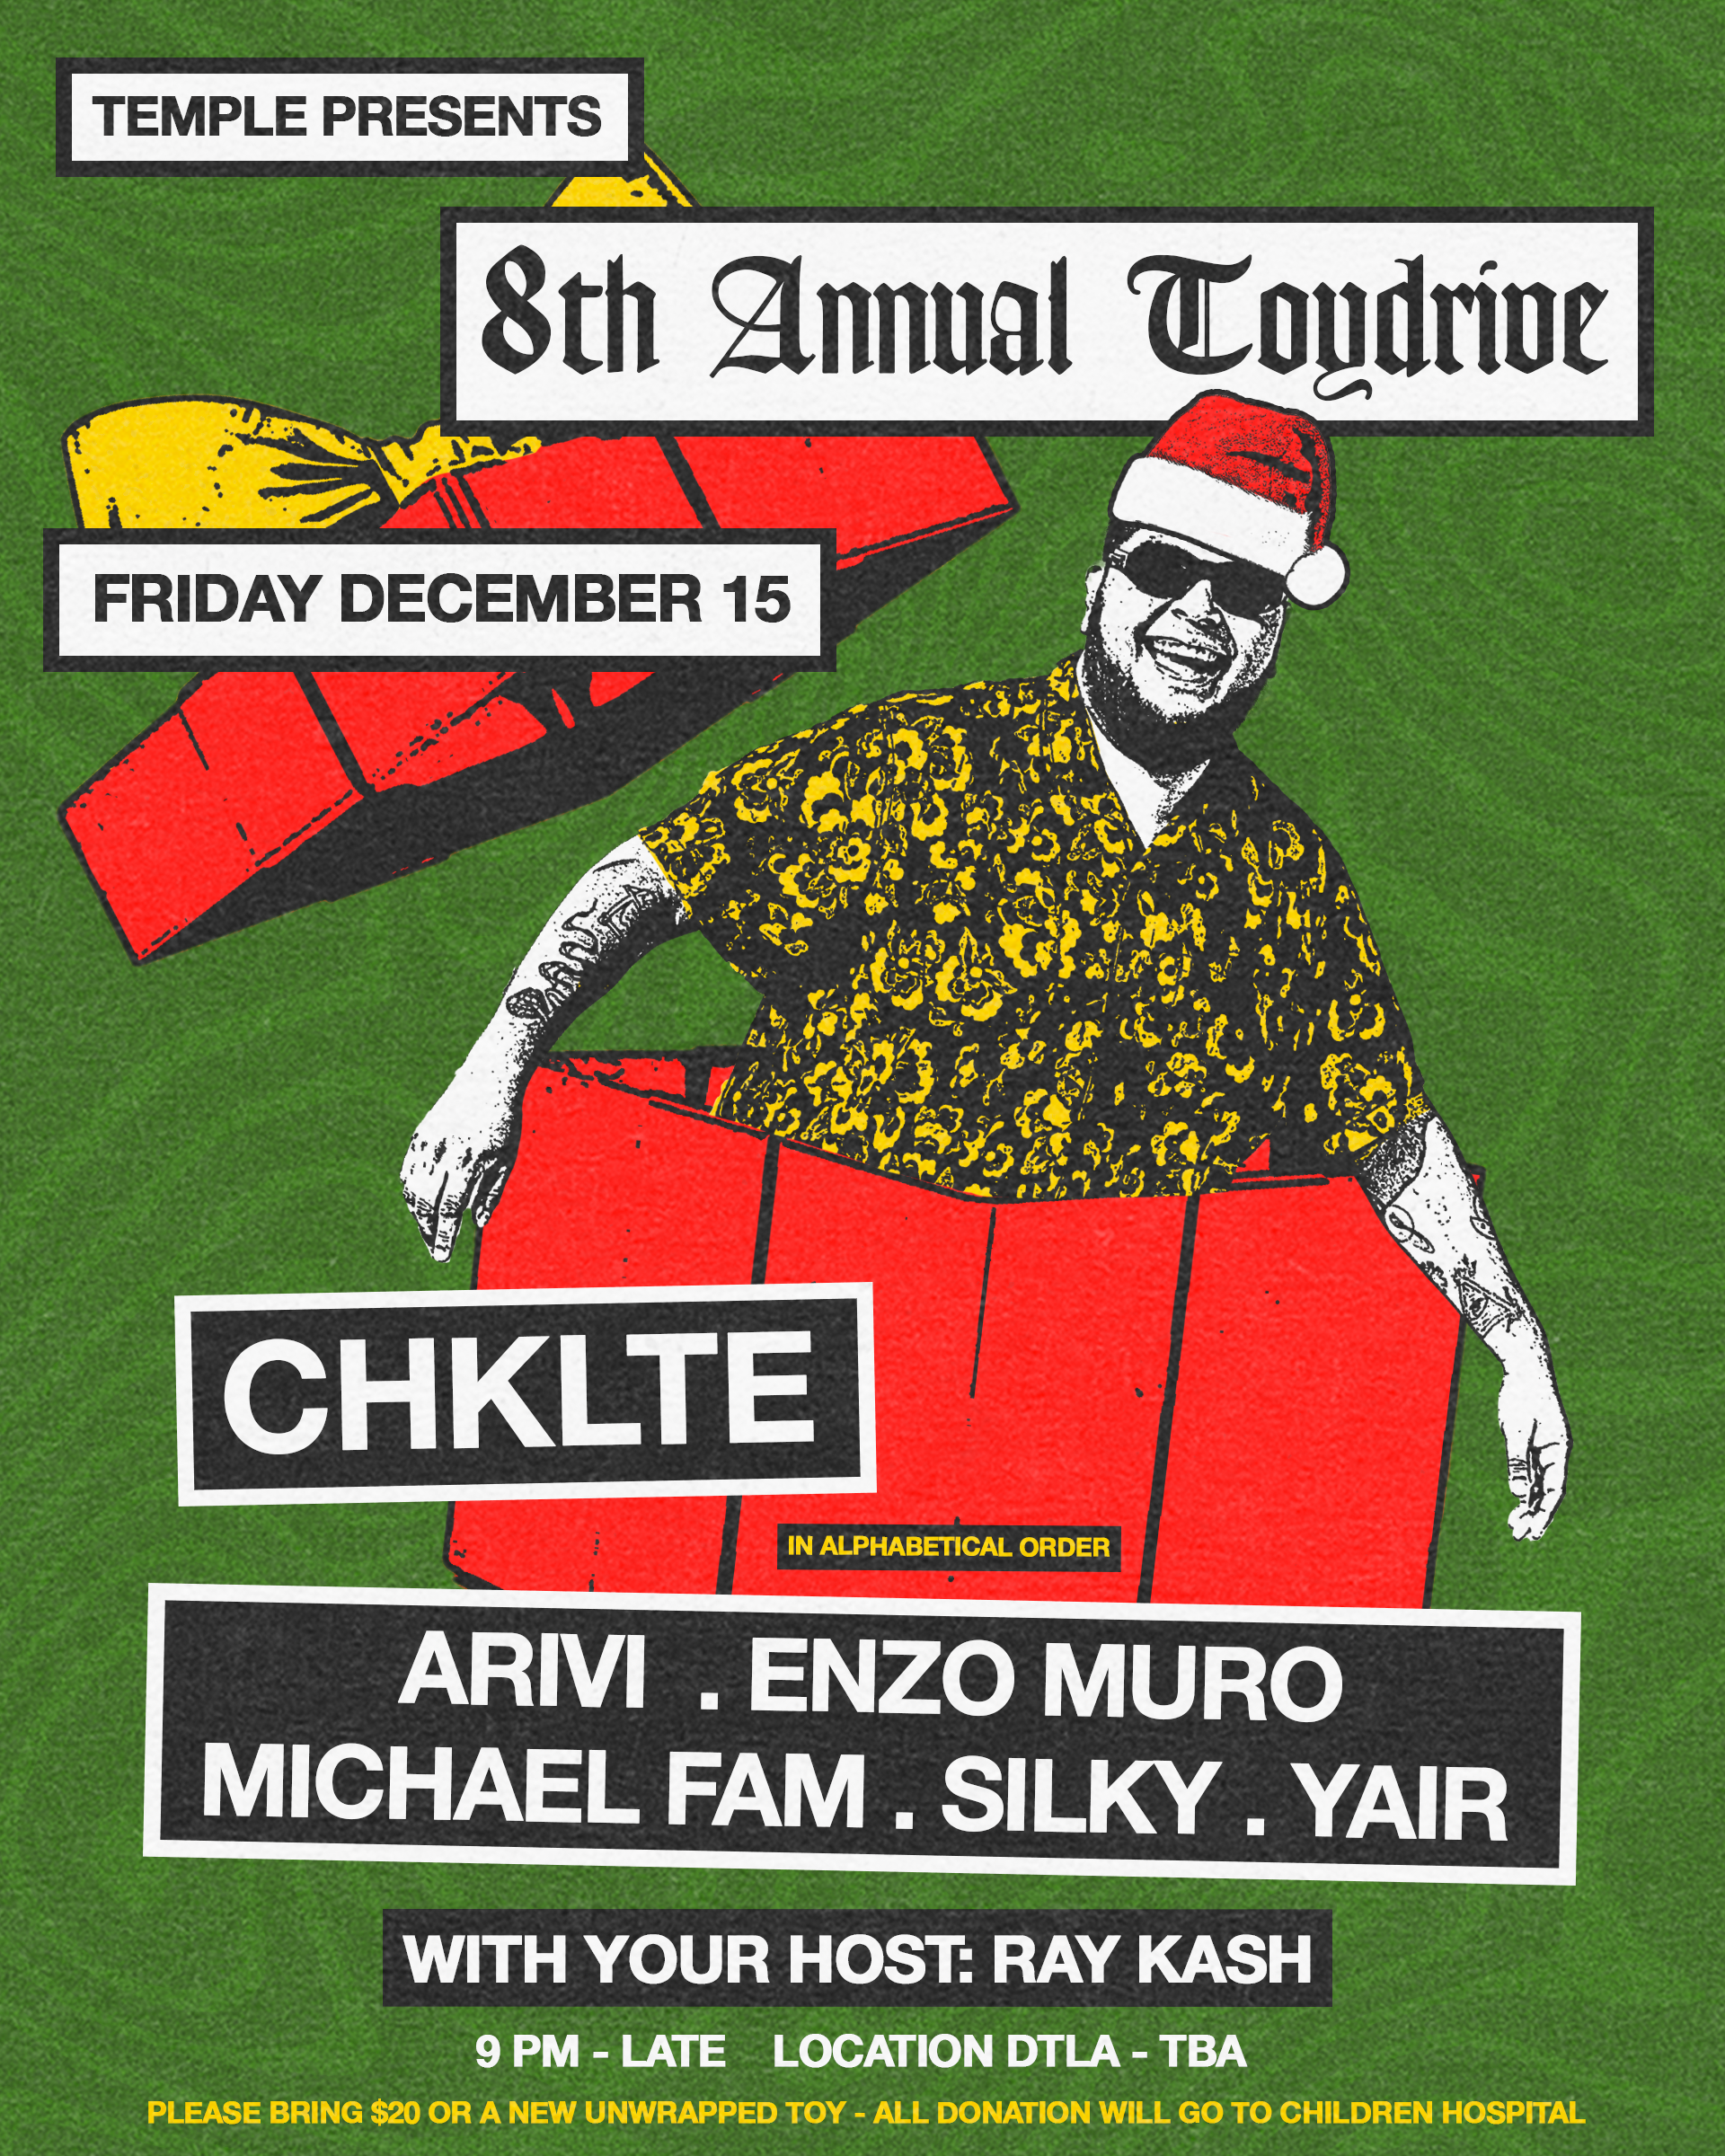 Temple presents 8th Annual Toydrive with CHKLTE & Silky - Página frontal